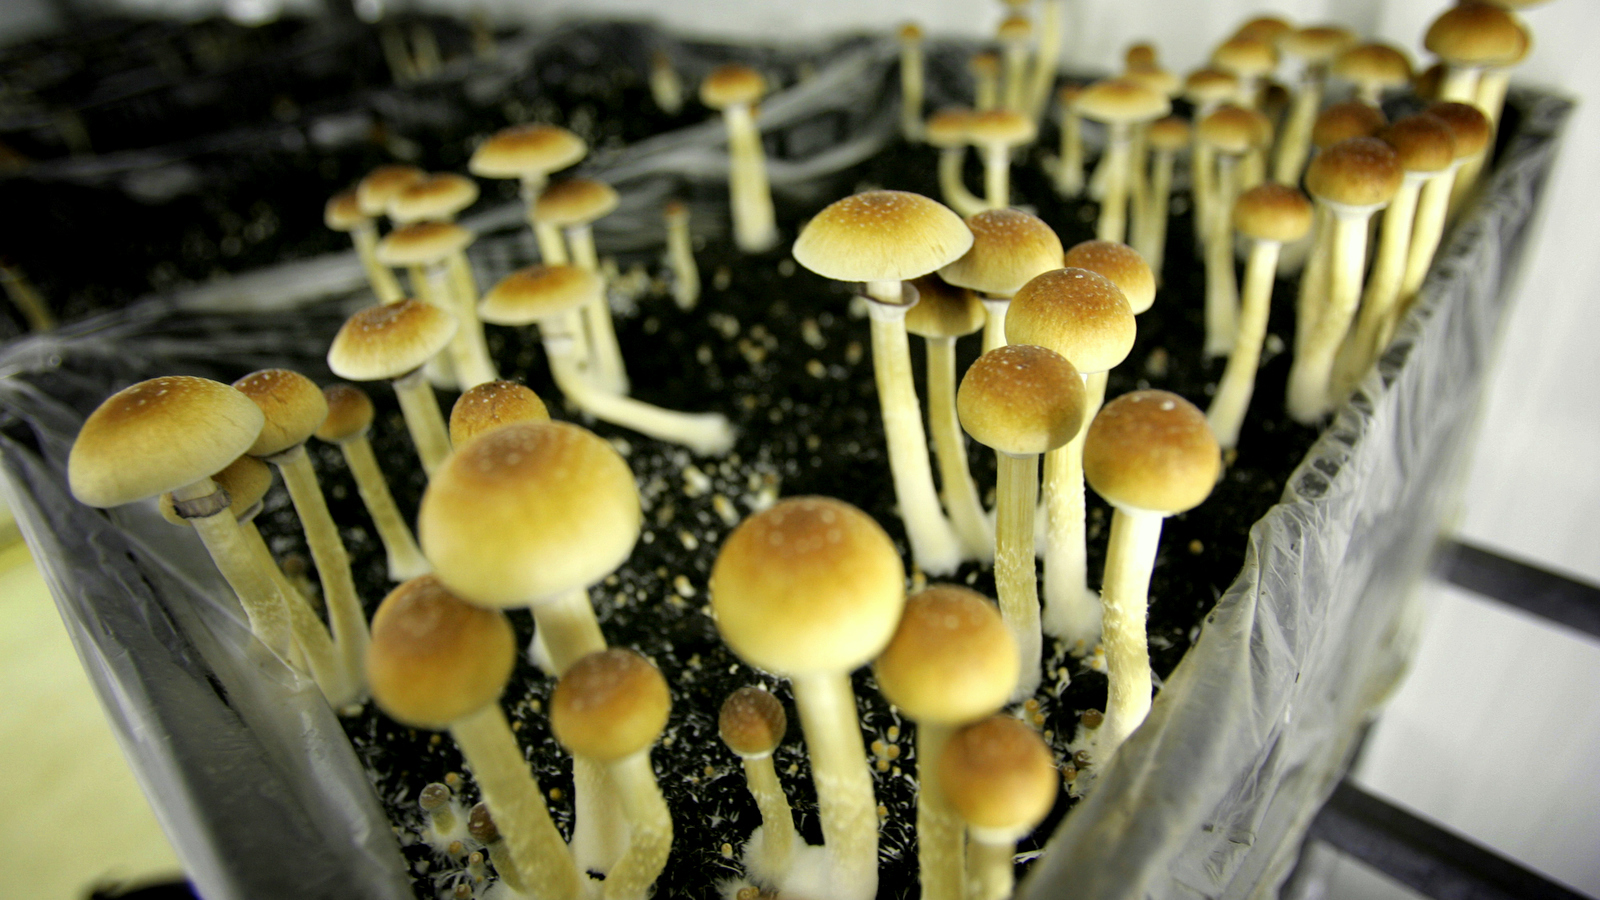 Psilocybin, more commonly known known as magic mushrooms are seen in a grow room at the Procare farm in Hazerswoude, central Netherlands. (AP Photo/Peter Dejong)